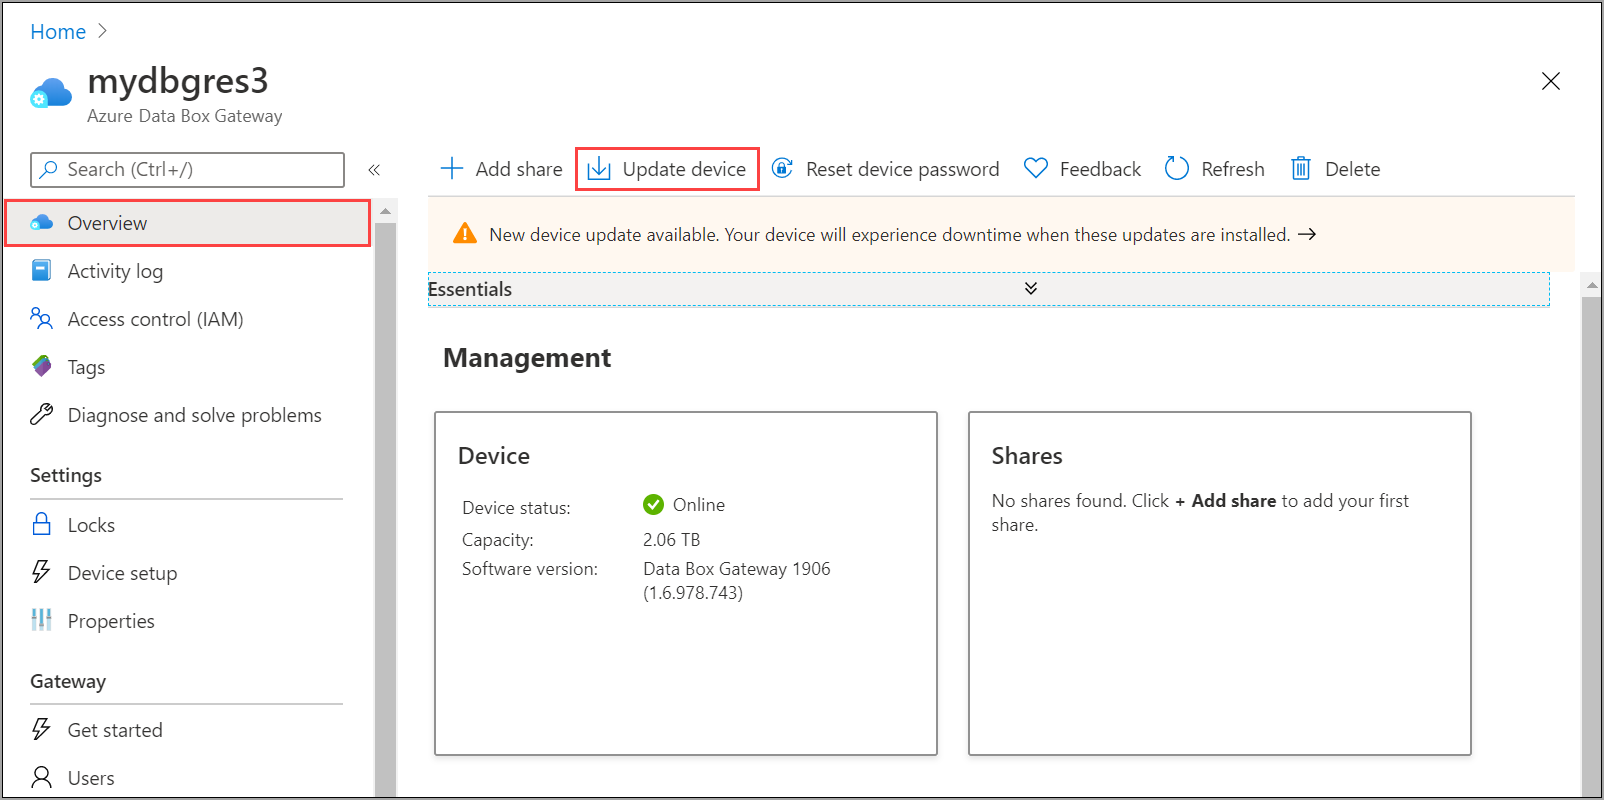 Screenshot of the Azure Data Box Gateway Home page with the Overview and Update device options called out.